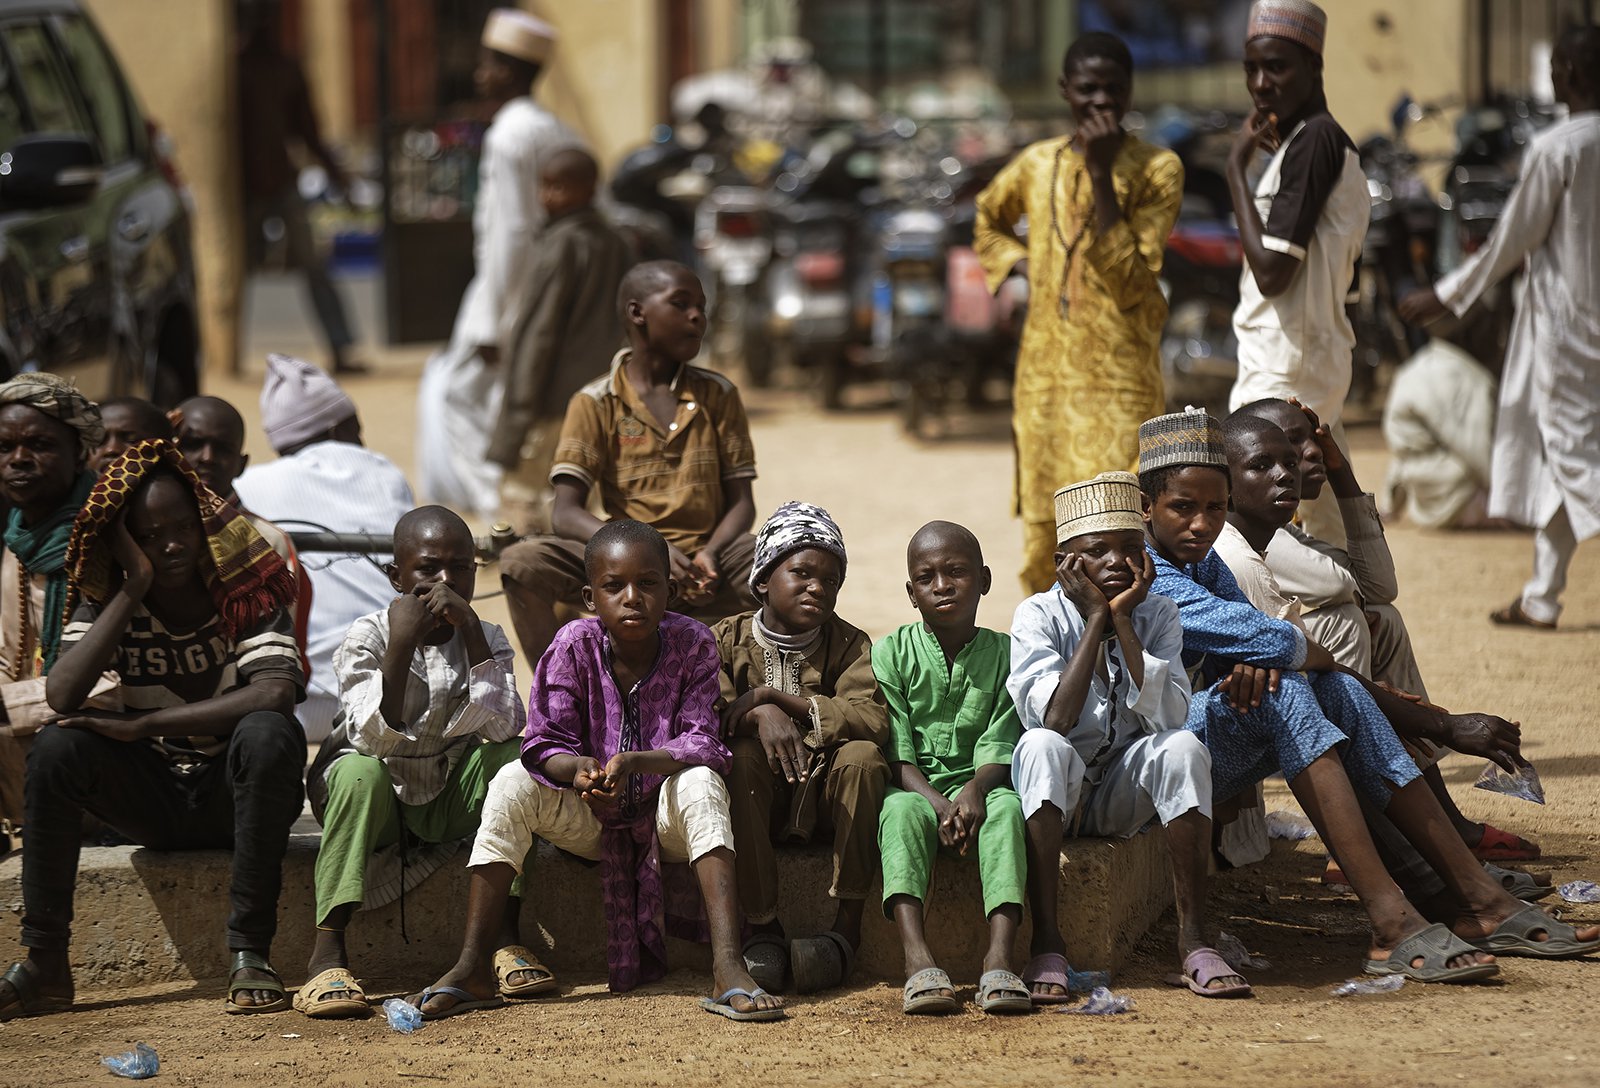 In northern Nigeria, Muslims and Christians take small